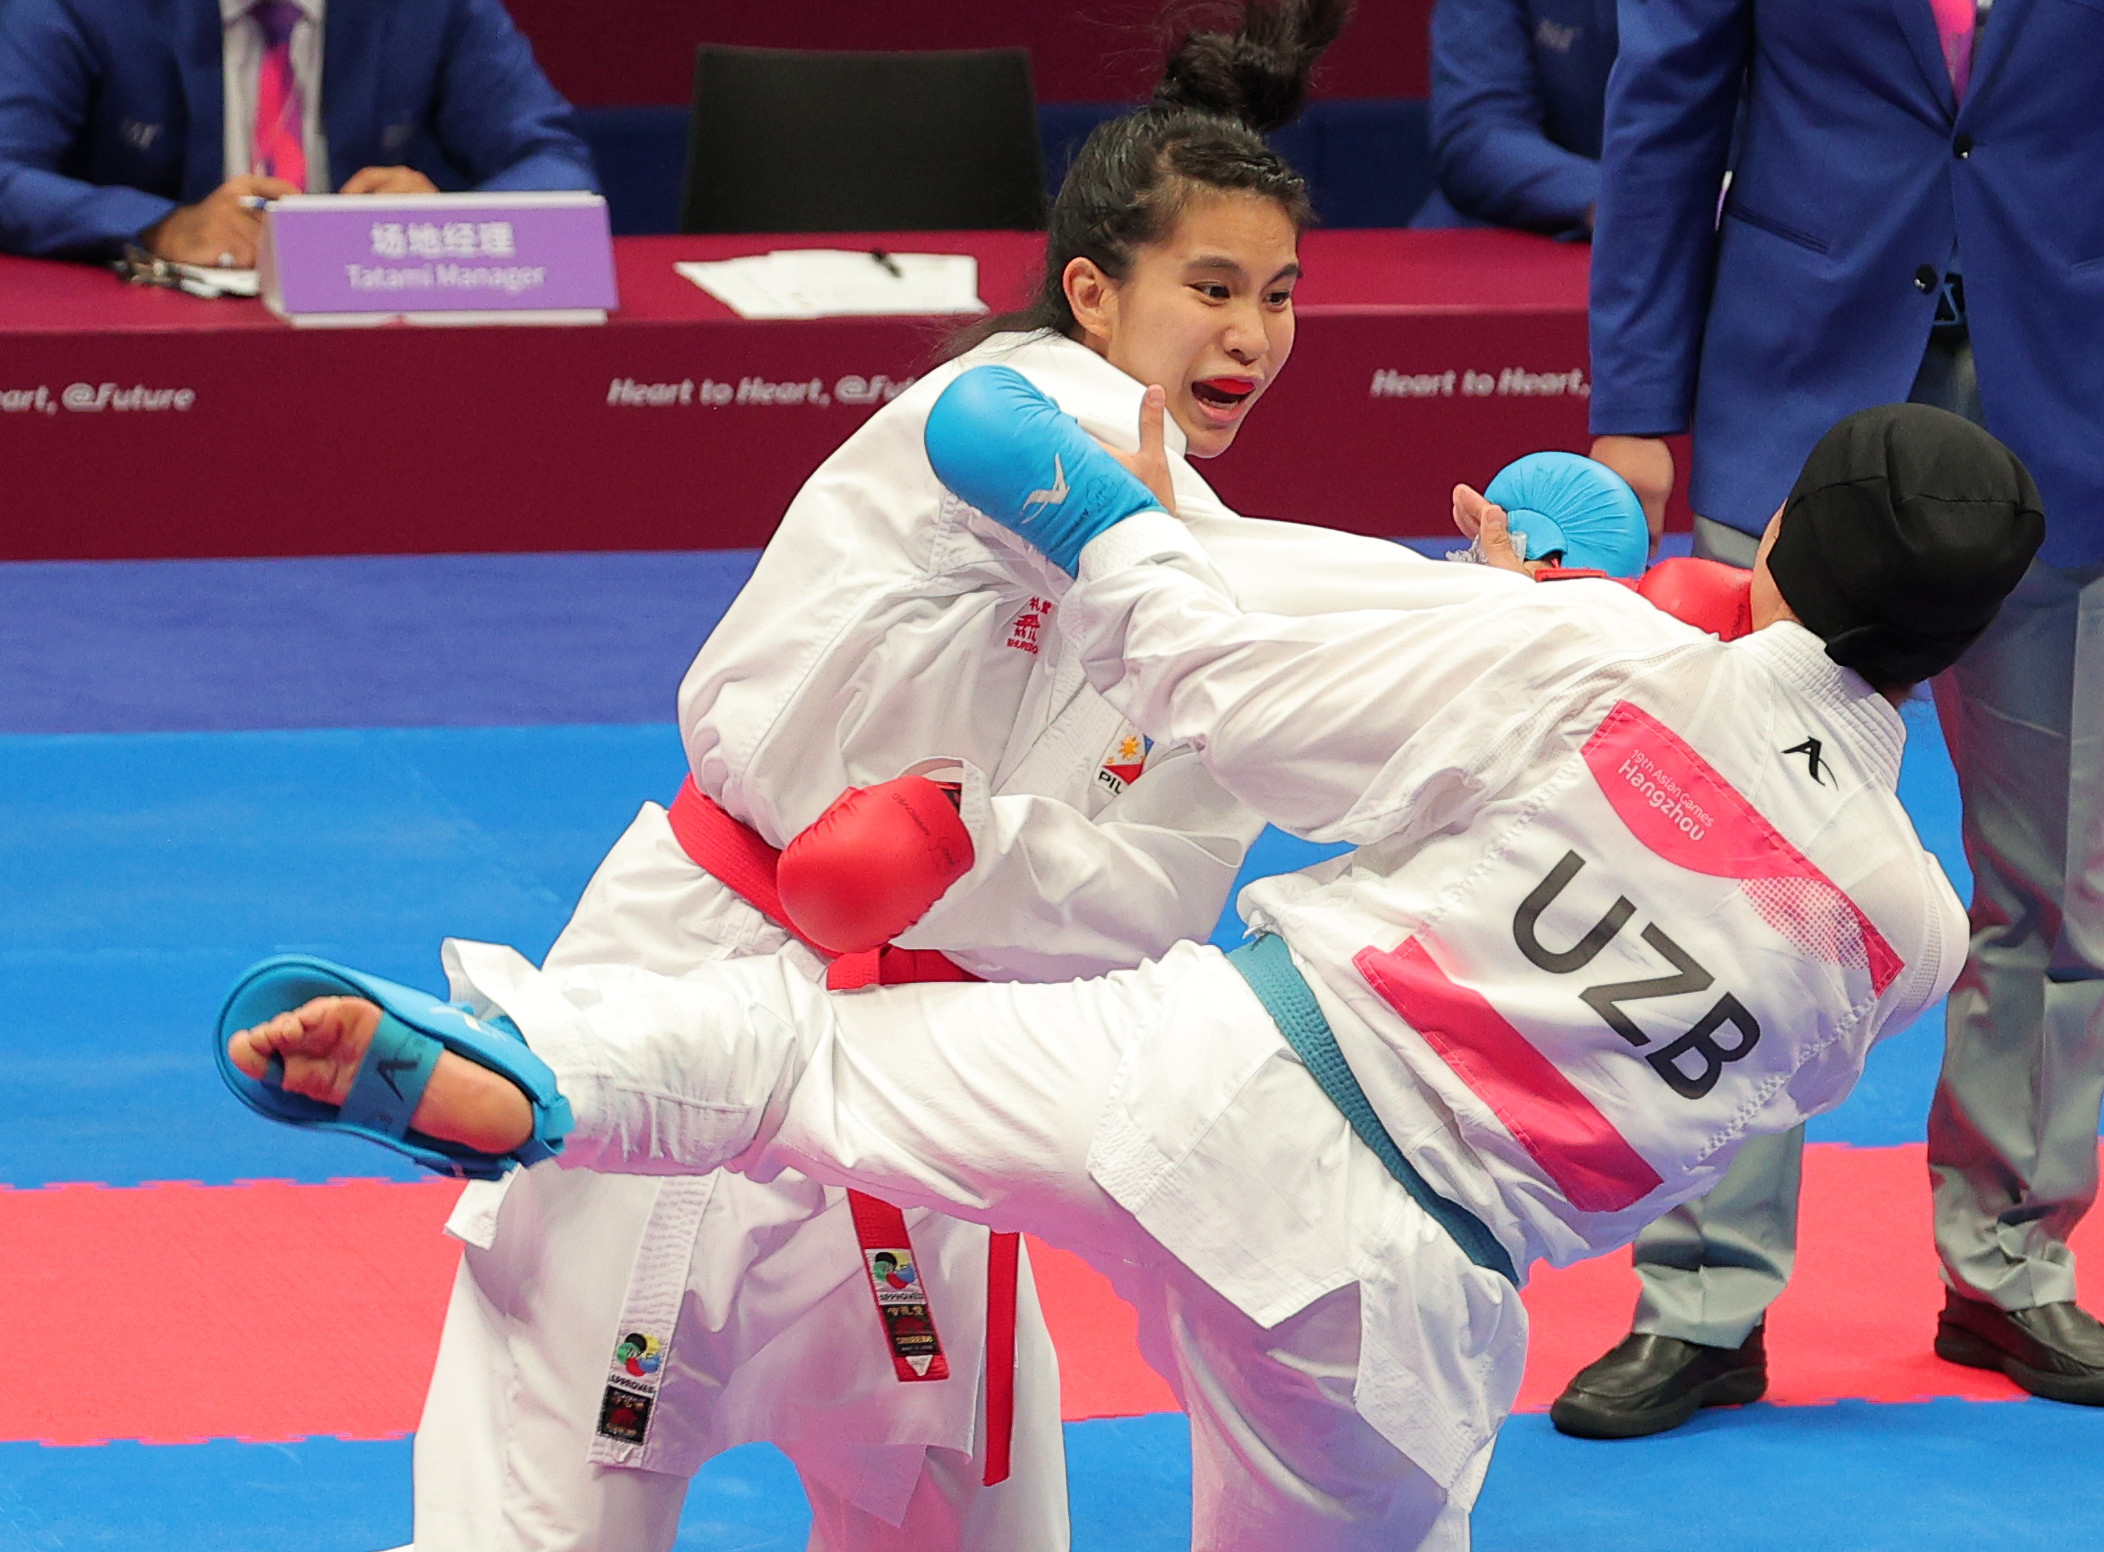 Sports we'd like to see in the Olympics: Karate